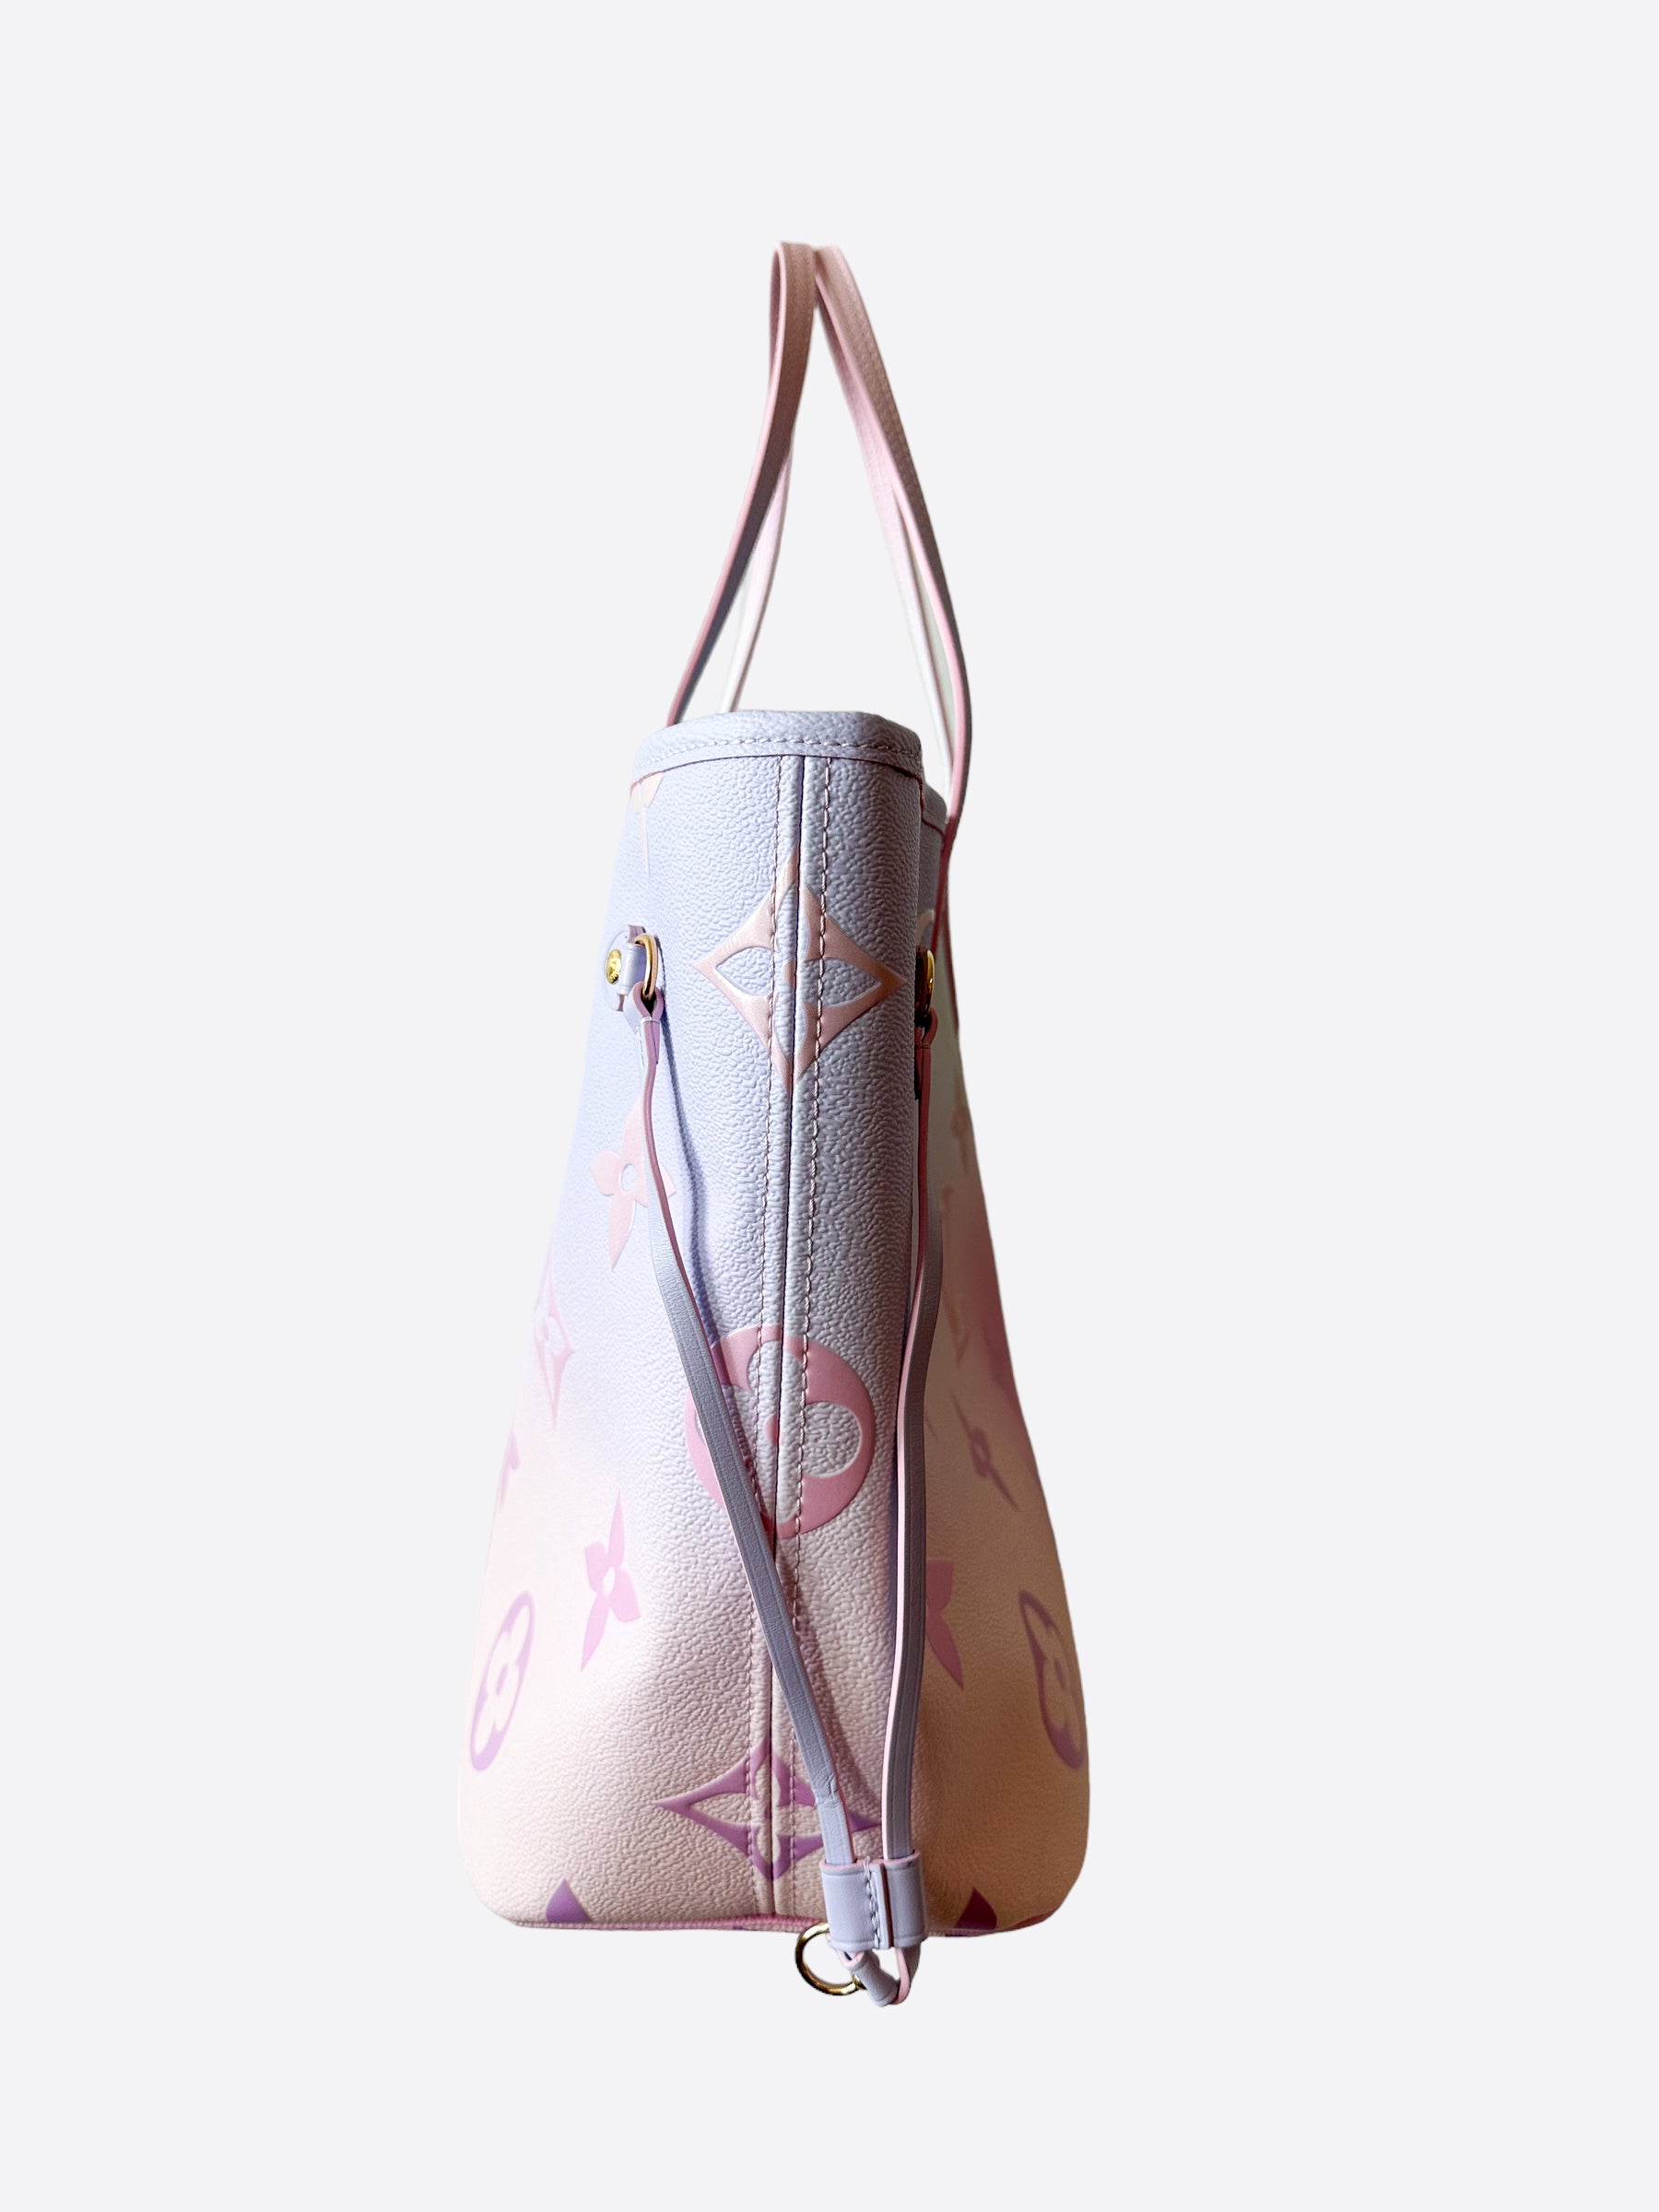 Louis Vuitton Neverfull MM, Sunrise Pastel Color, New in Dustbag